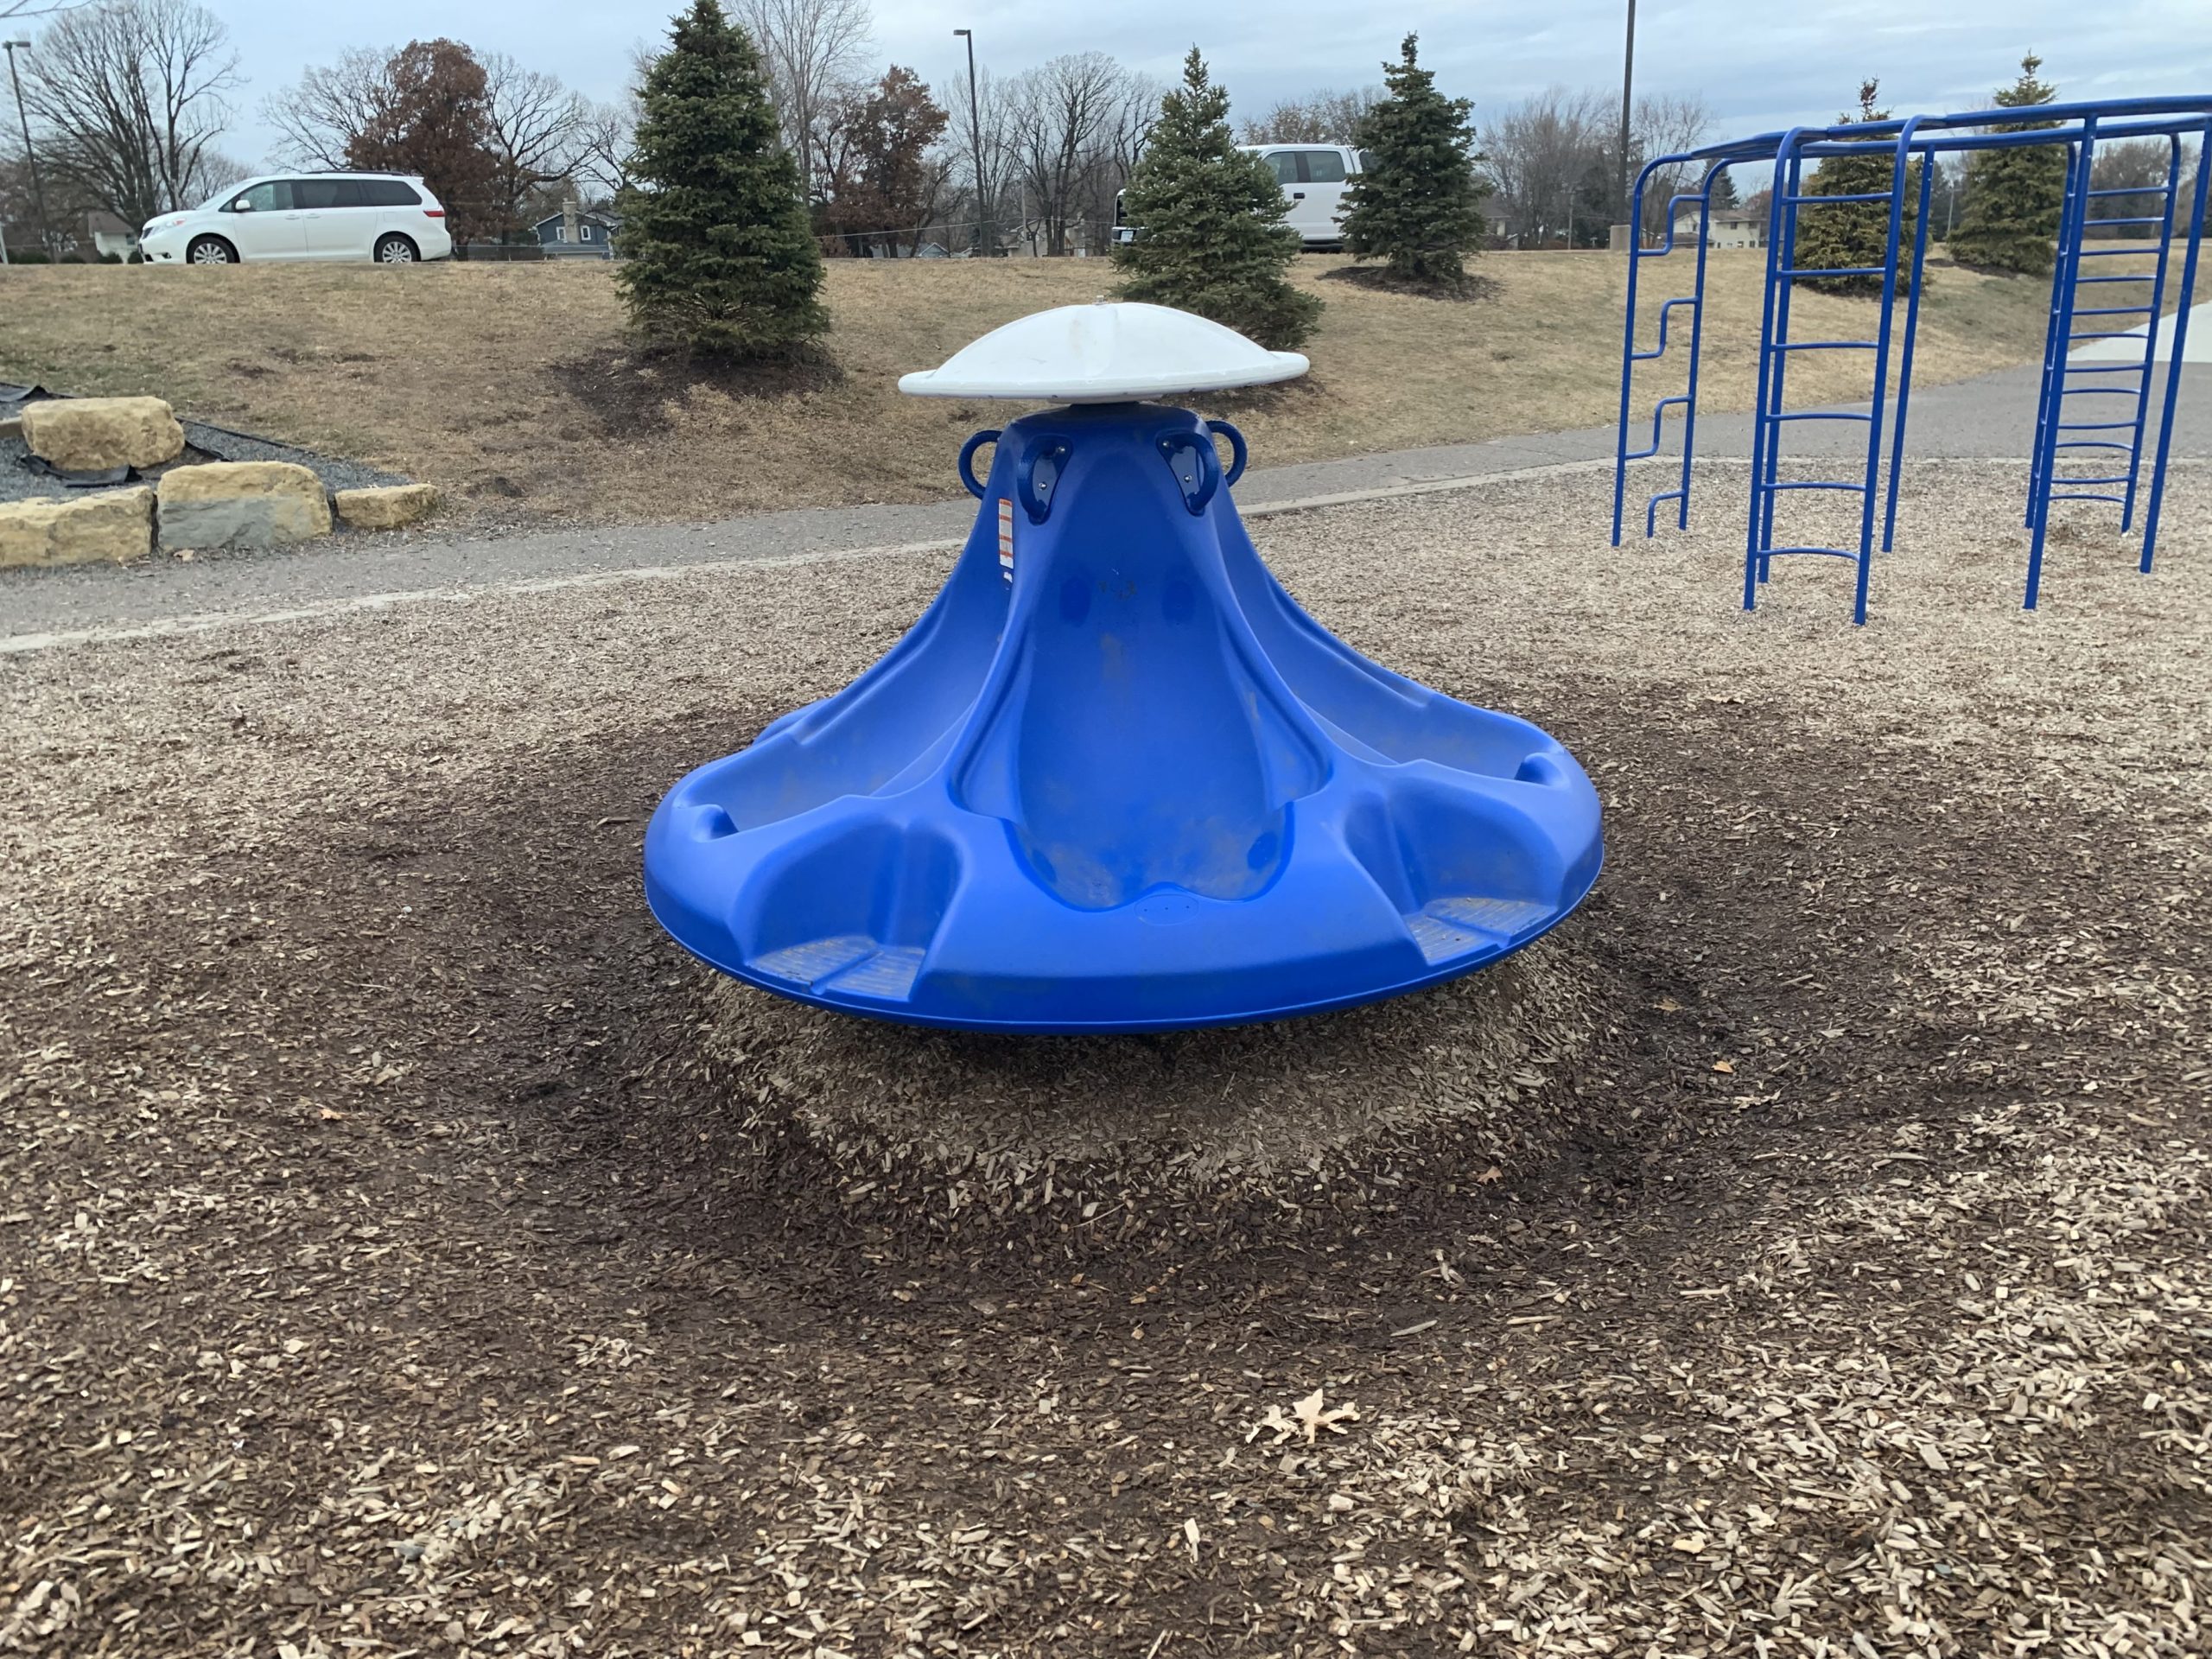 Playground spinner with large holes around it where the kids are running